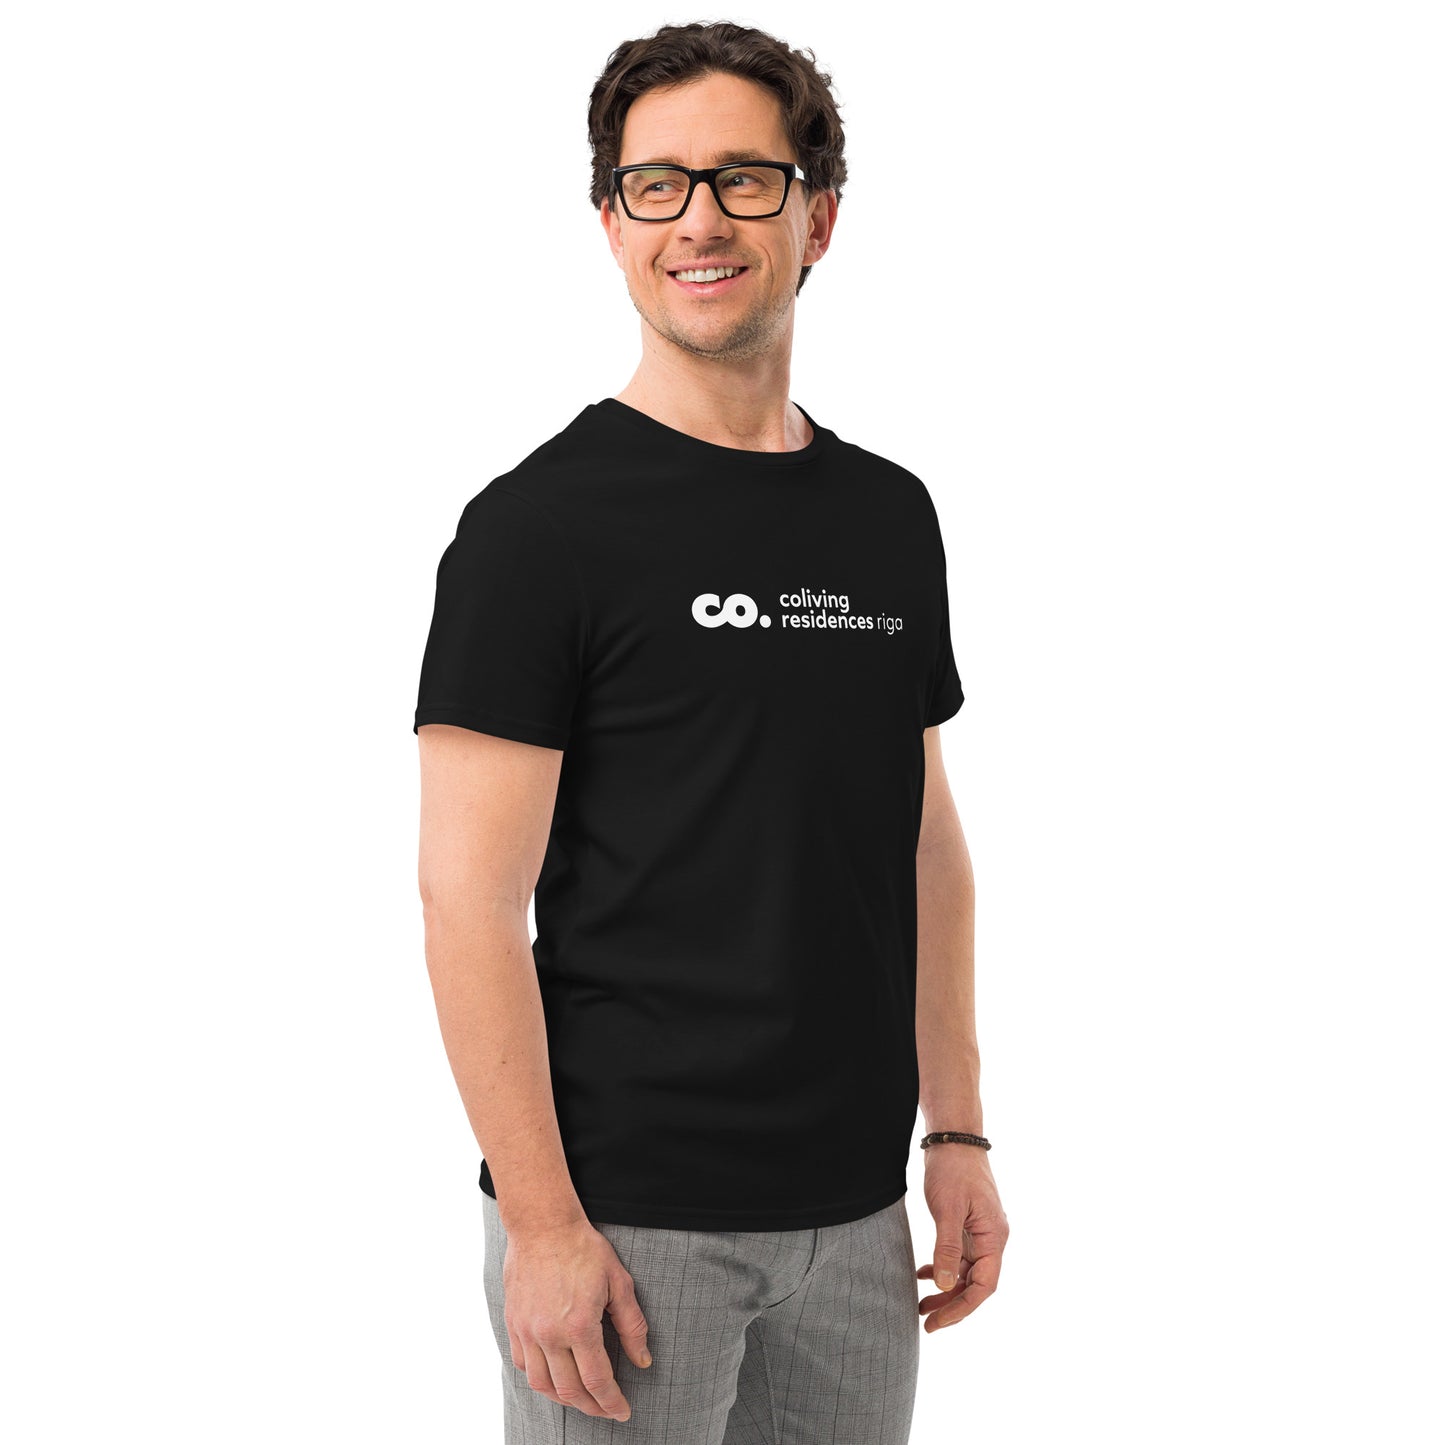 Front view of a white man wearing a black t-shirt with logo of coliving residences riga